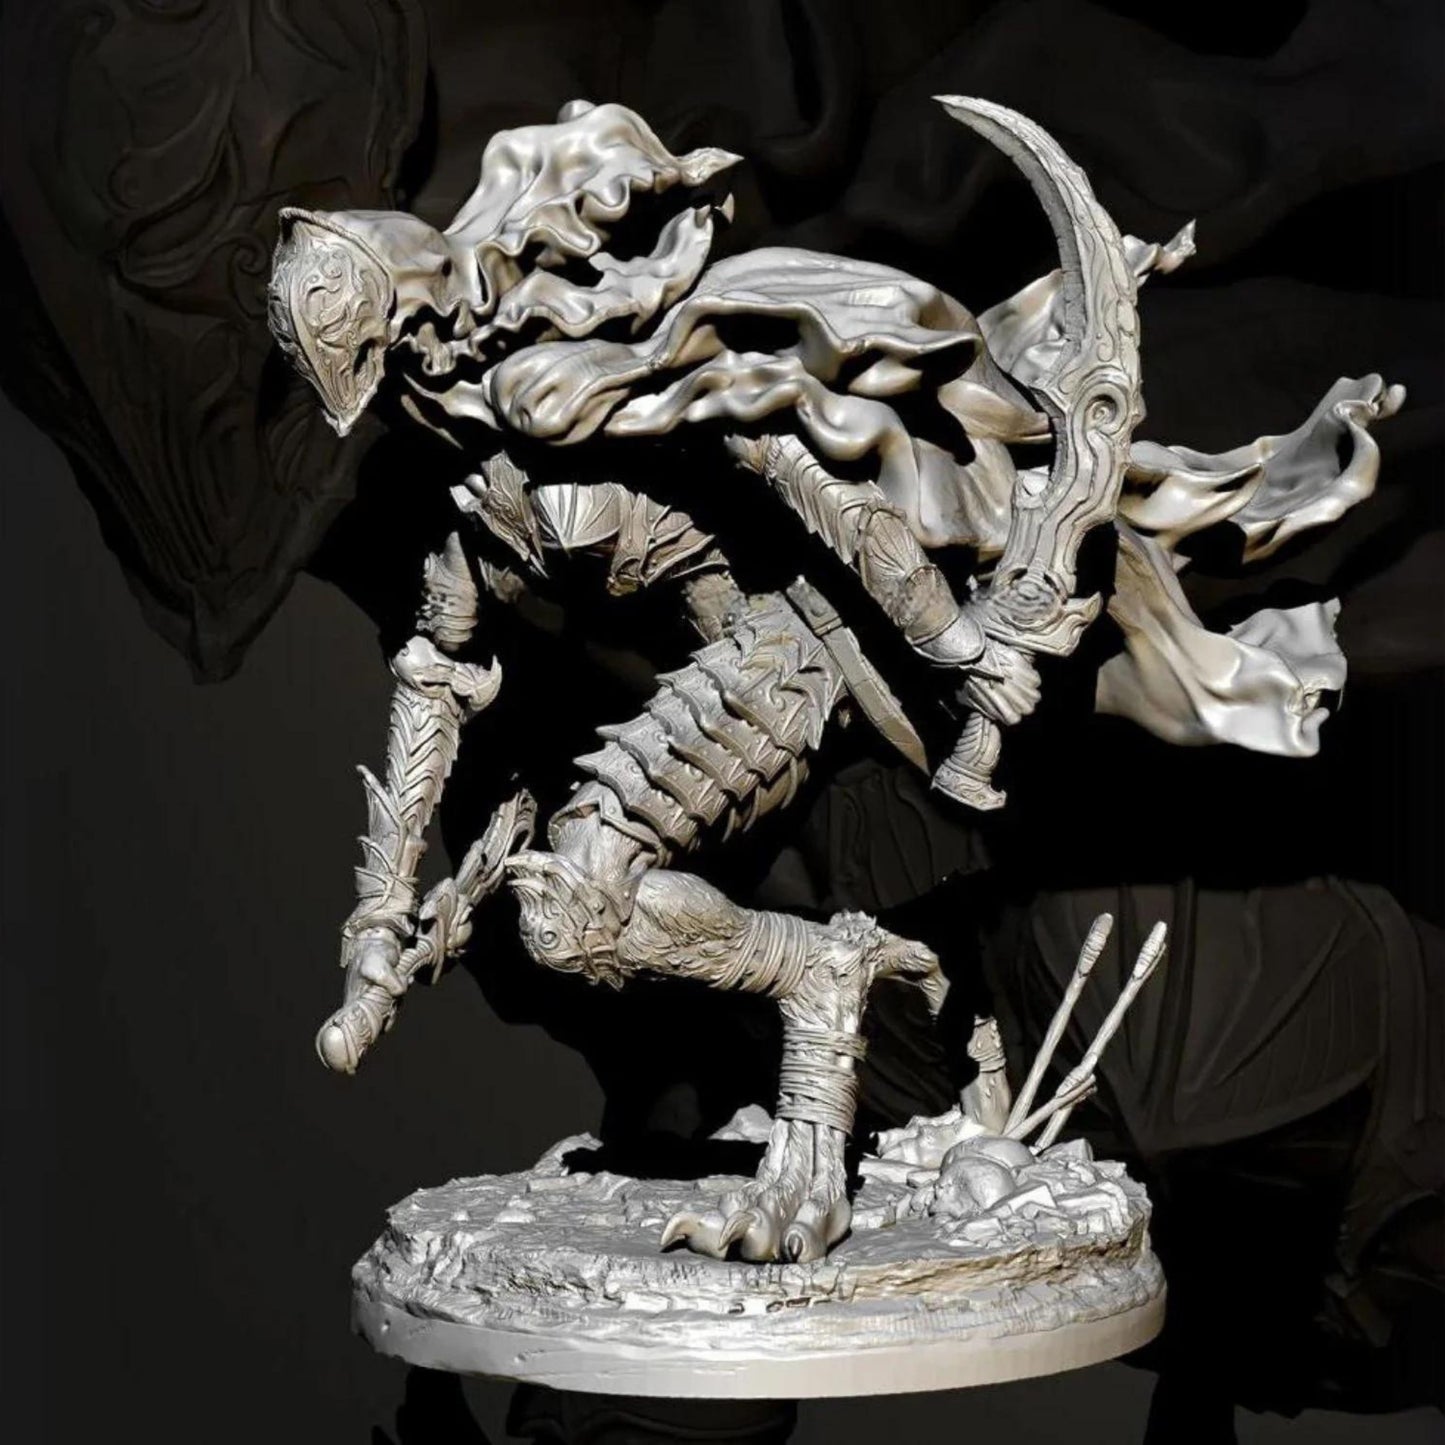 18+ Collector's 3D Printed Model: 55mm 75mm Resin figure model kit DIY colorless and self-assembled TD-4050